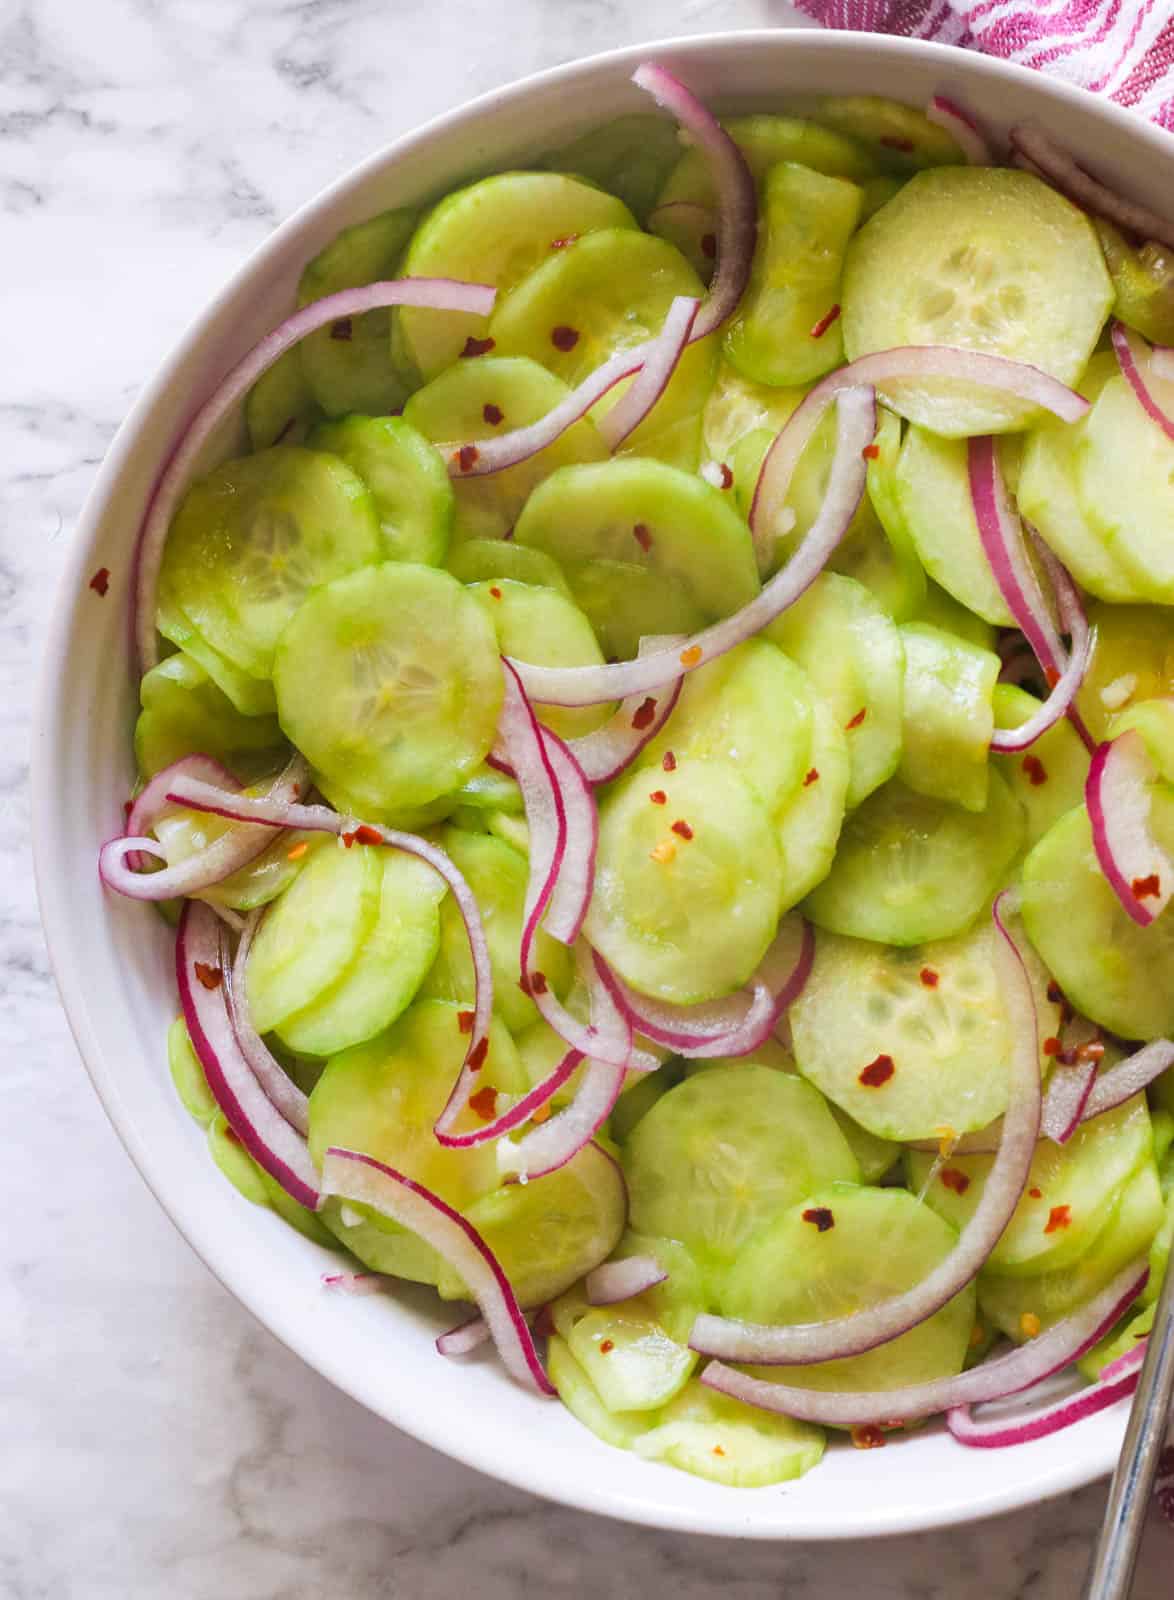 Refreshing Cucumber and onion salad with red pepper flakes